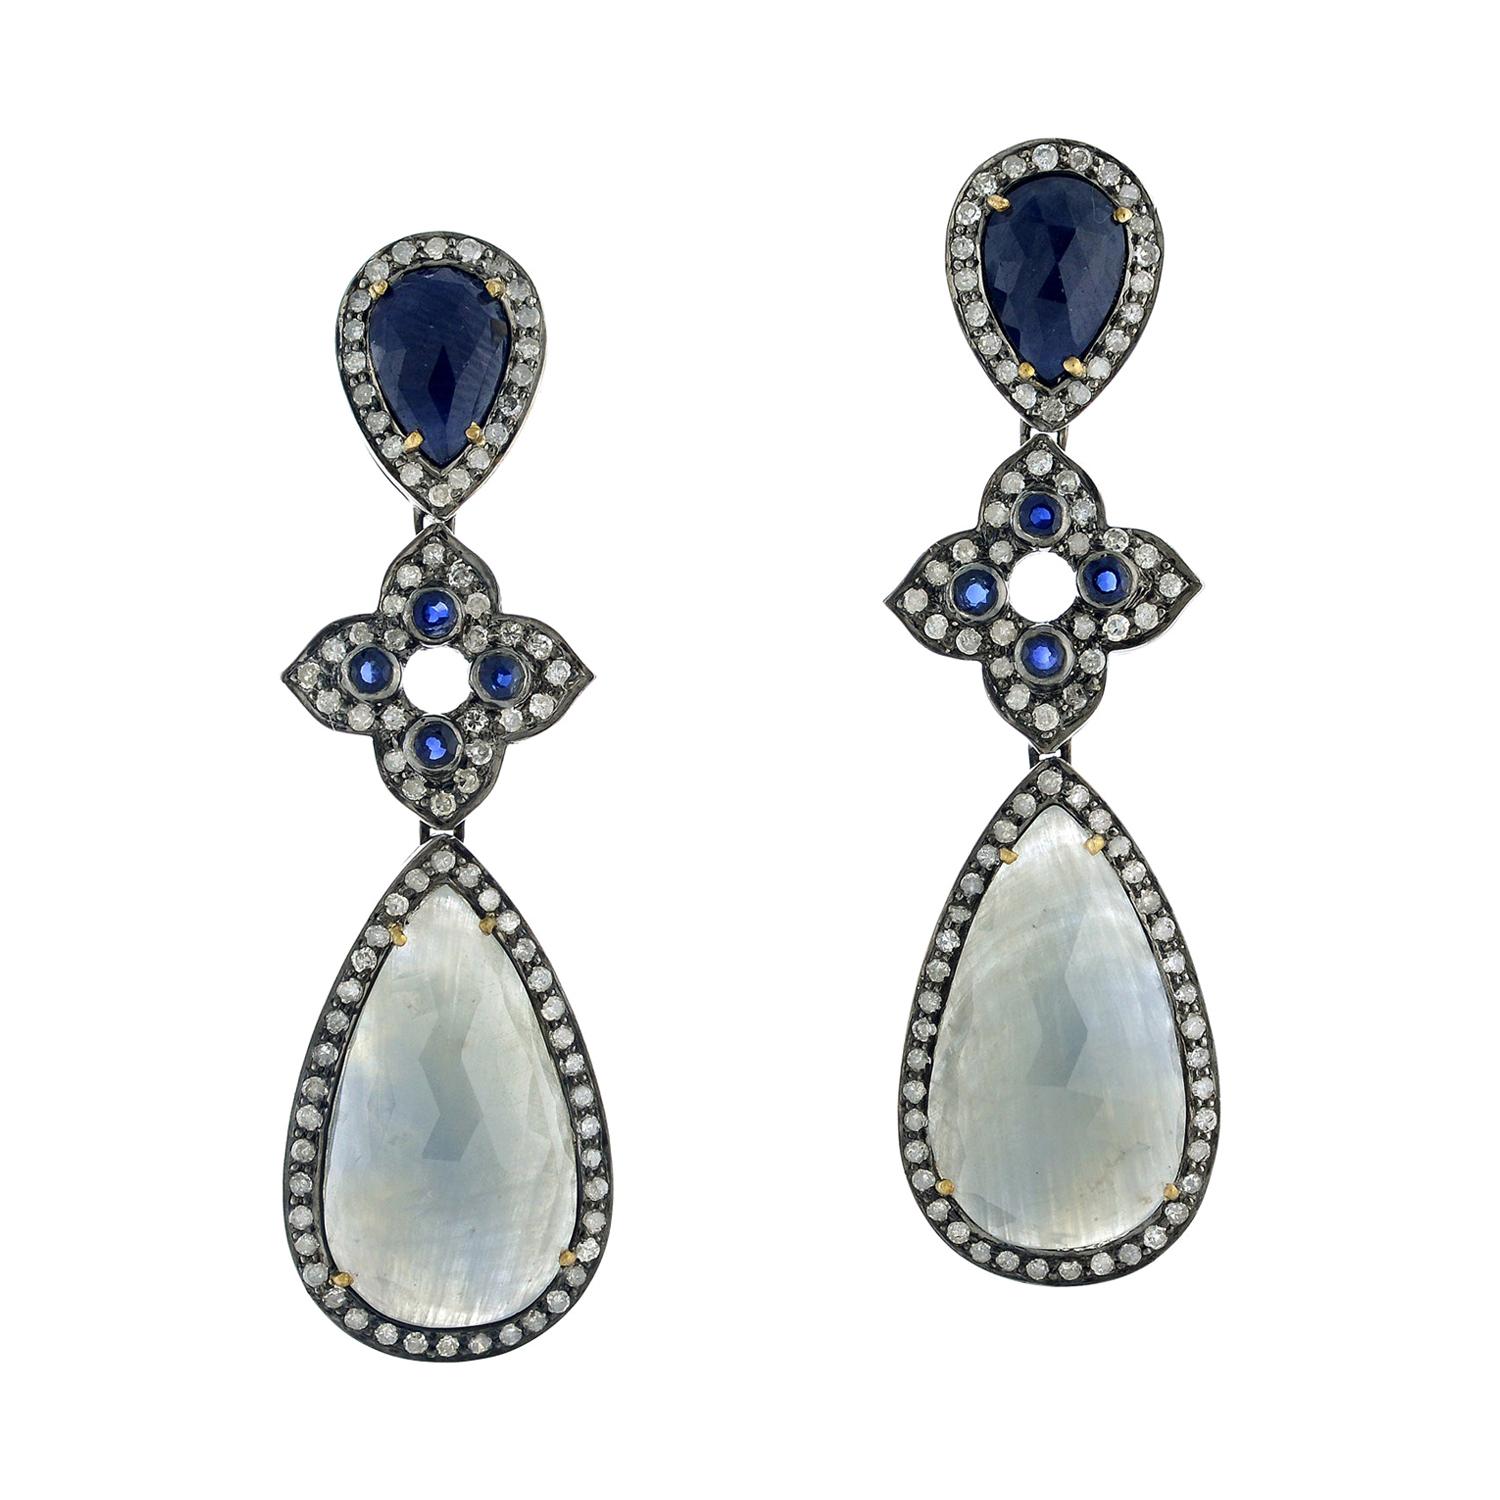 Two-Tier Sapphire Dangle Earring with Diamond Motif in 18k Gold and Silver